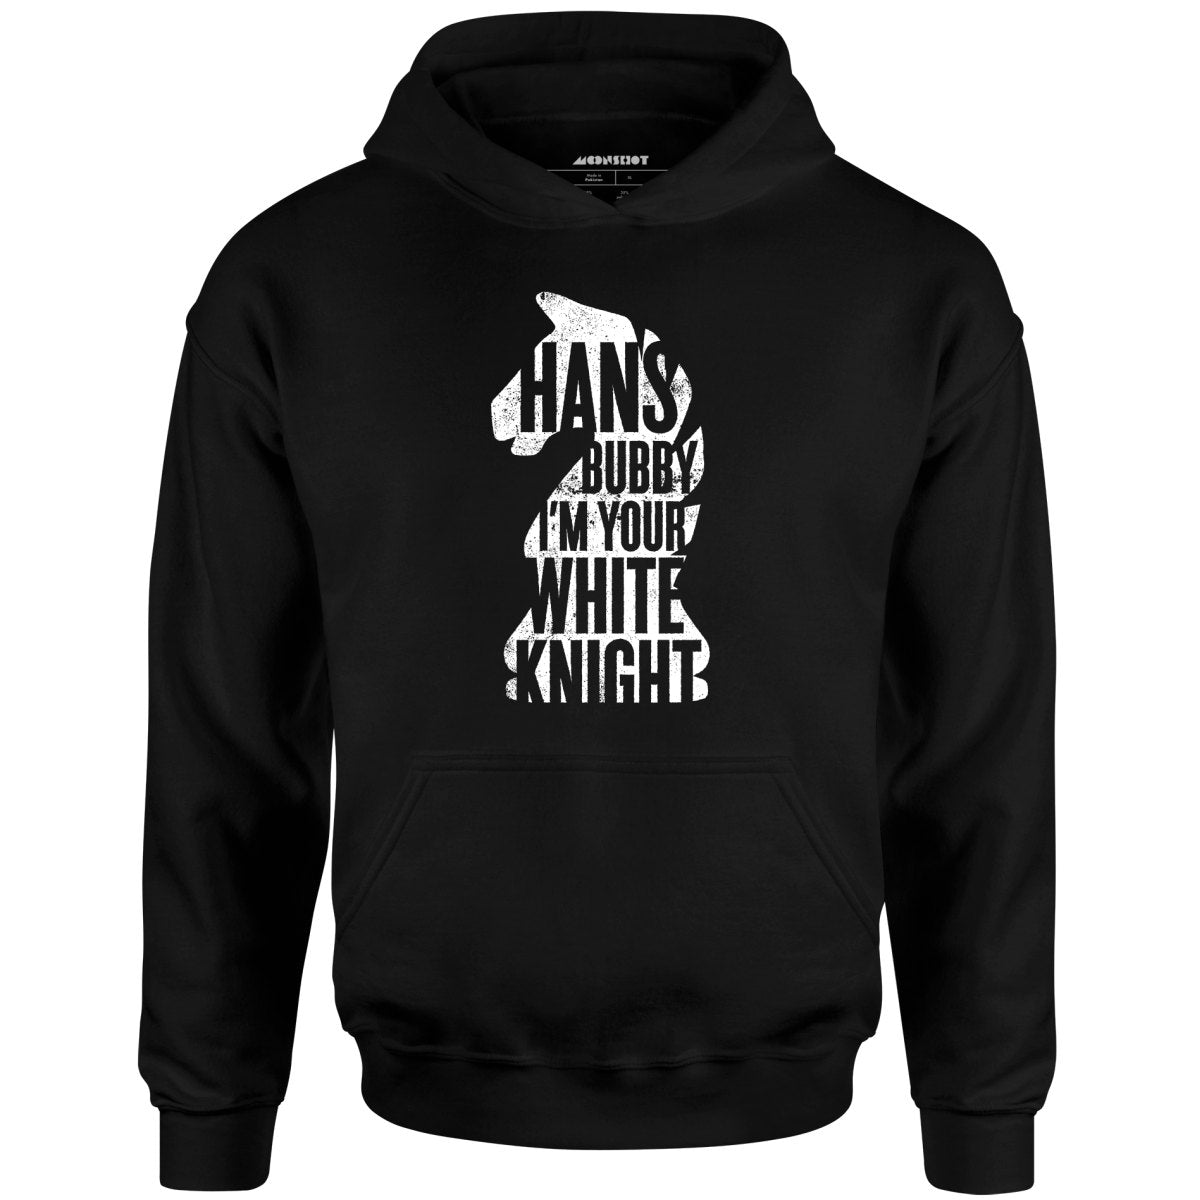 Hans Bubby I'm Your White Knight - Unisex Hoodie